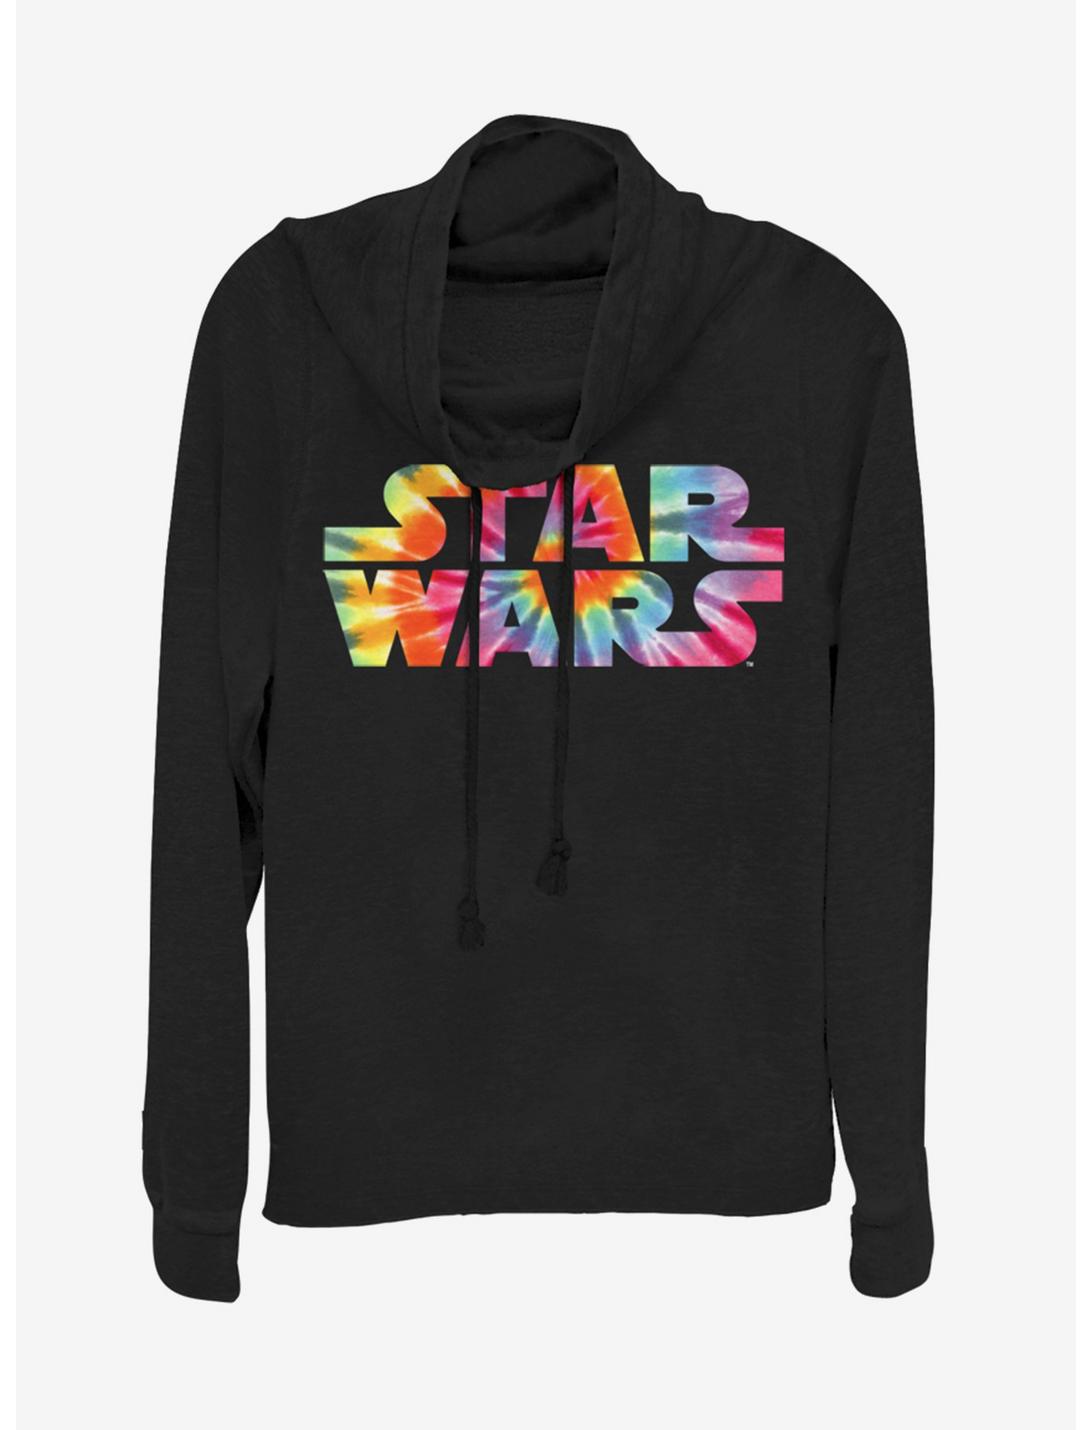 Lucasfilm Star Wars To Dye For Cowlneck Long-Sleeve Womens Top, BLACK, hi-res